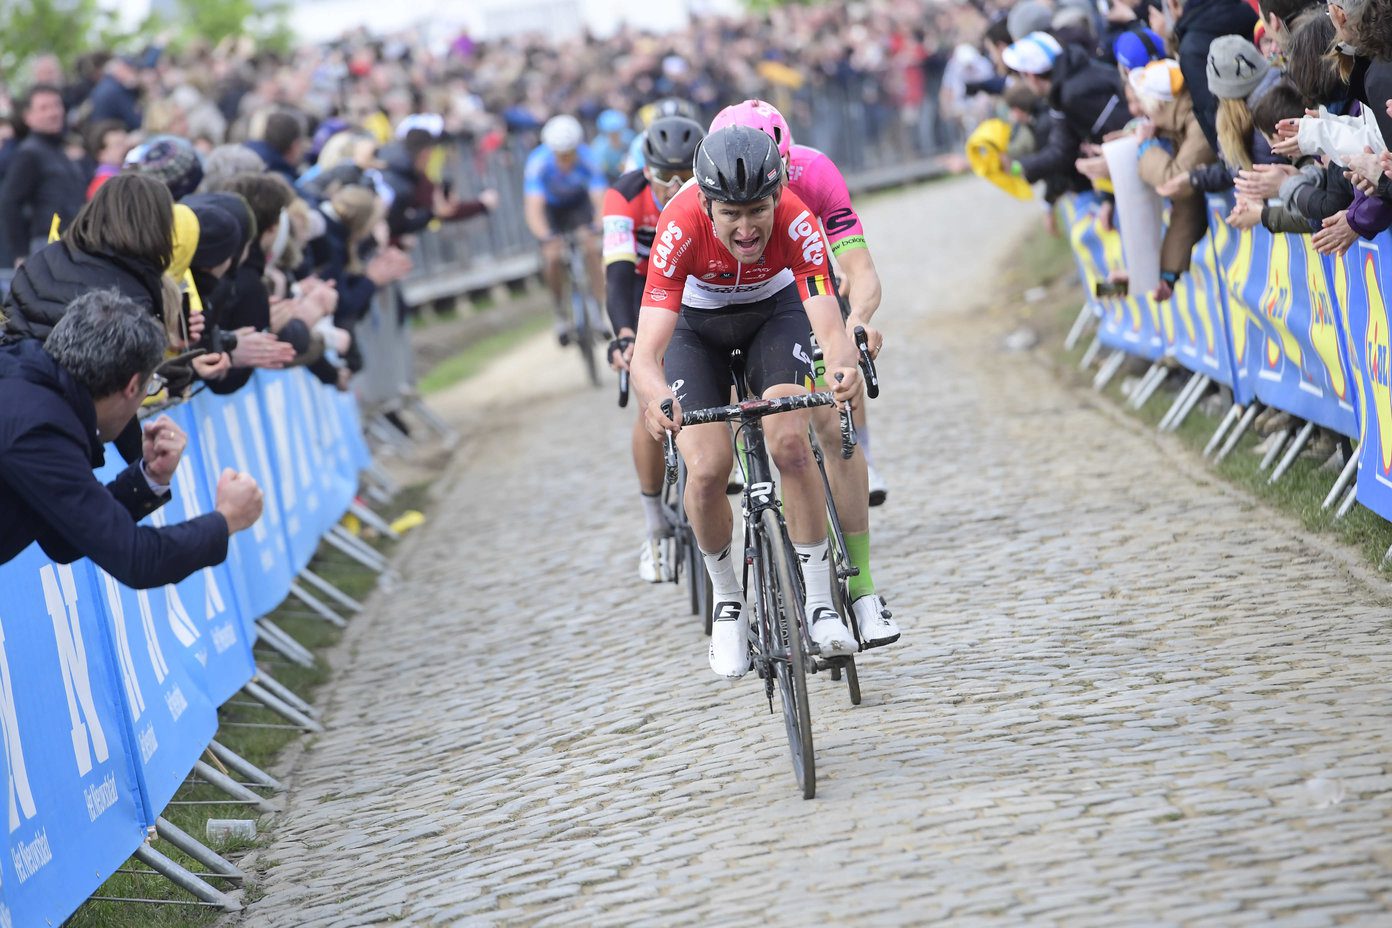 How to watch the Tour of Flanders 2019 in Canada - Canadian Cycling ...